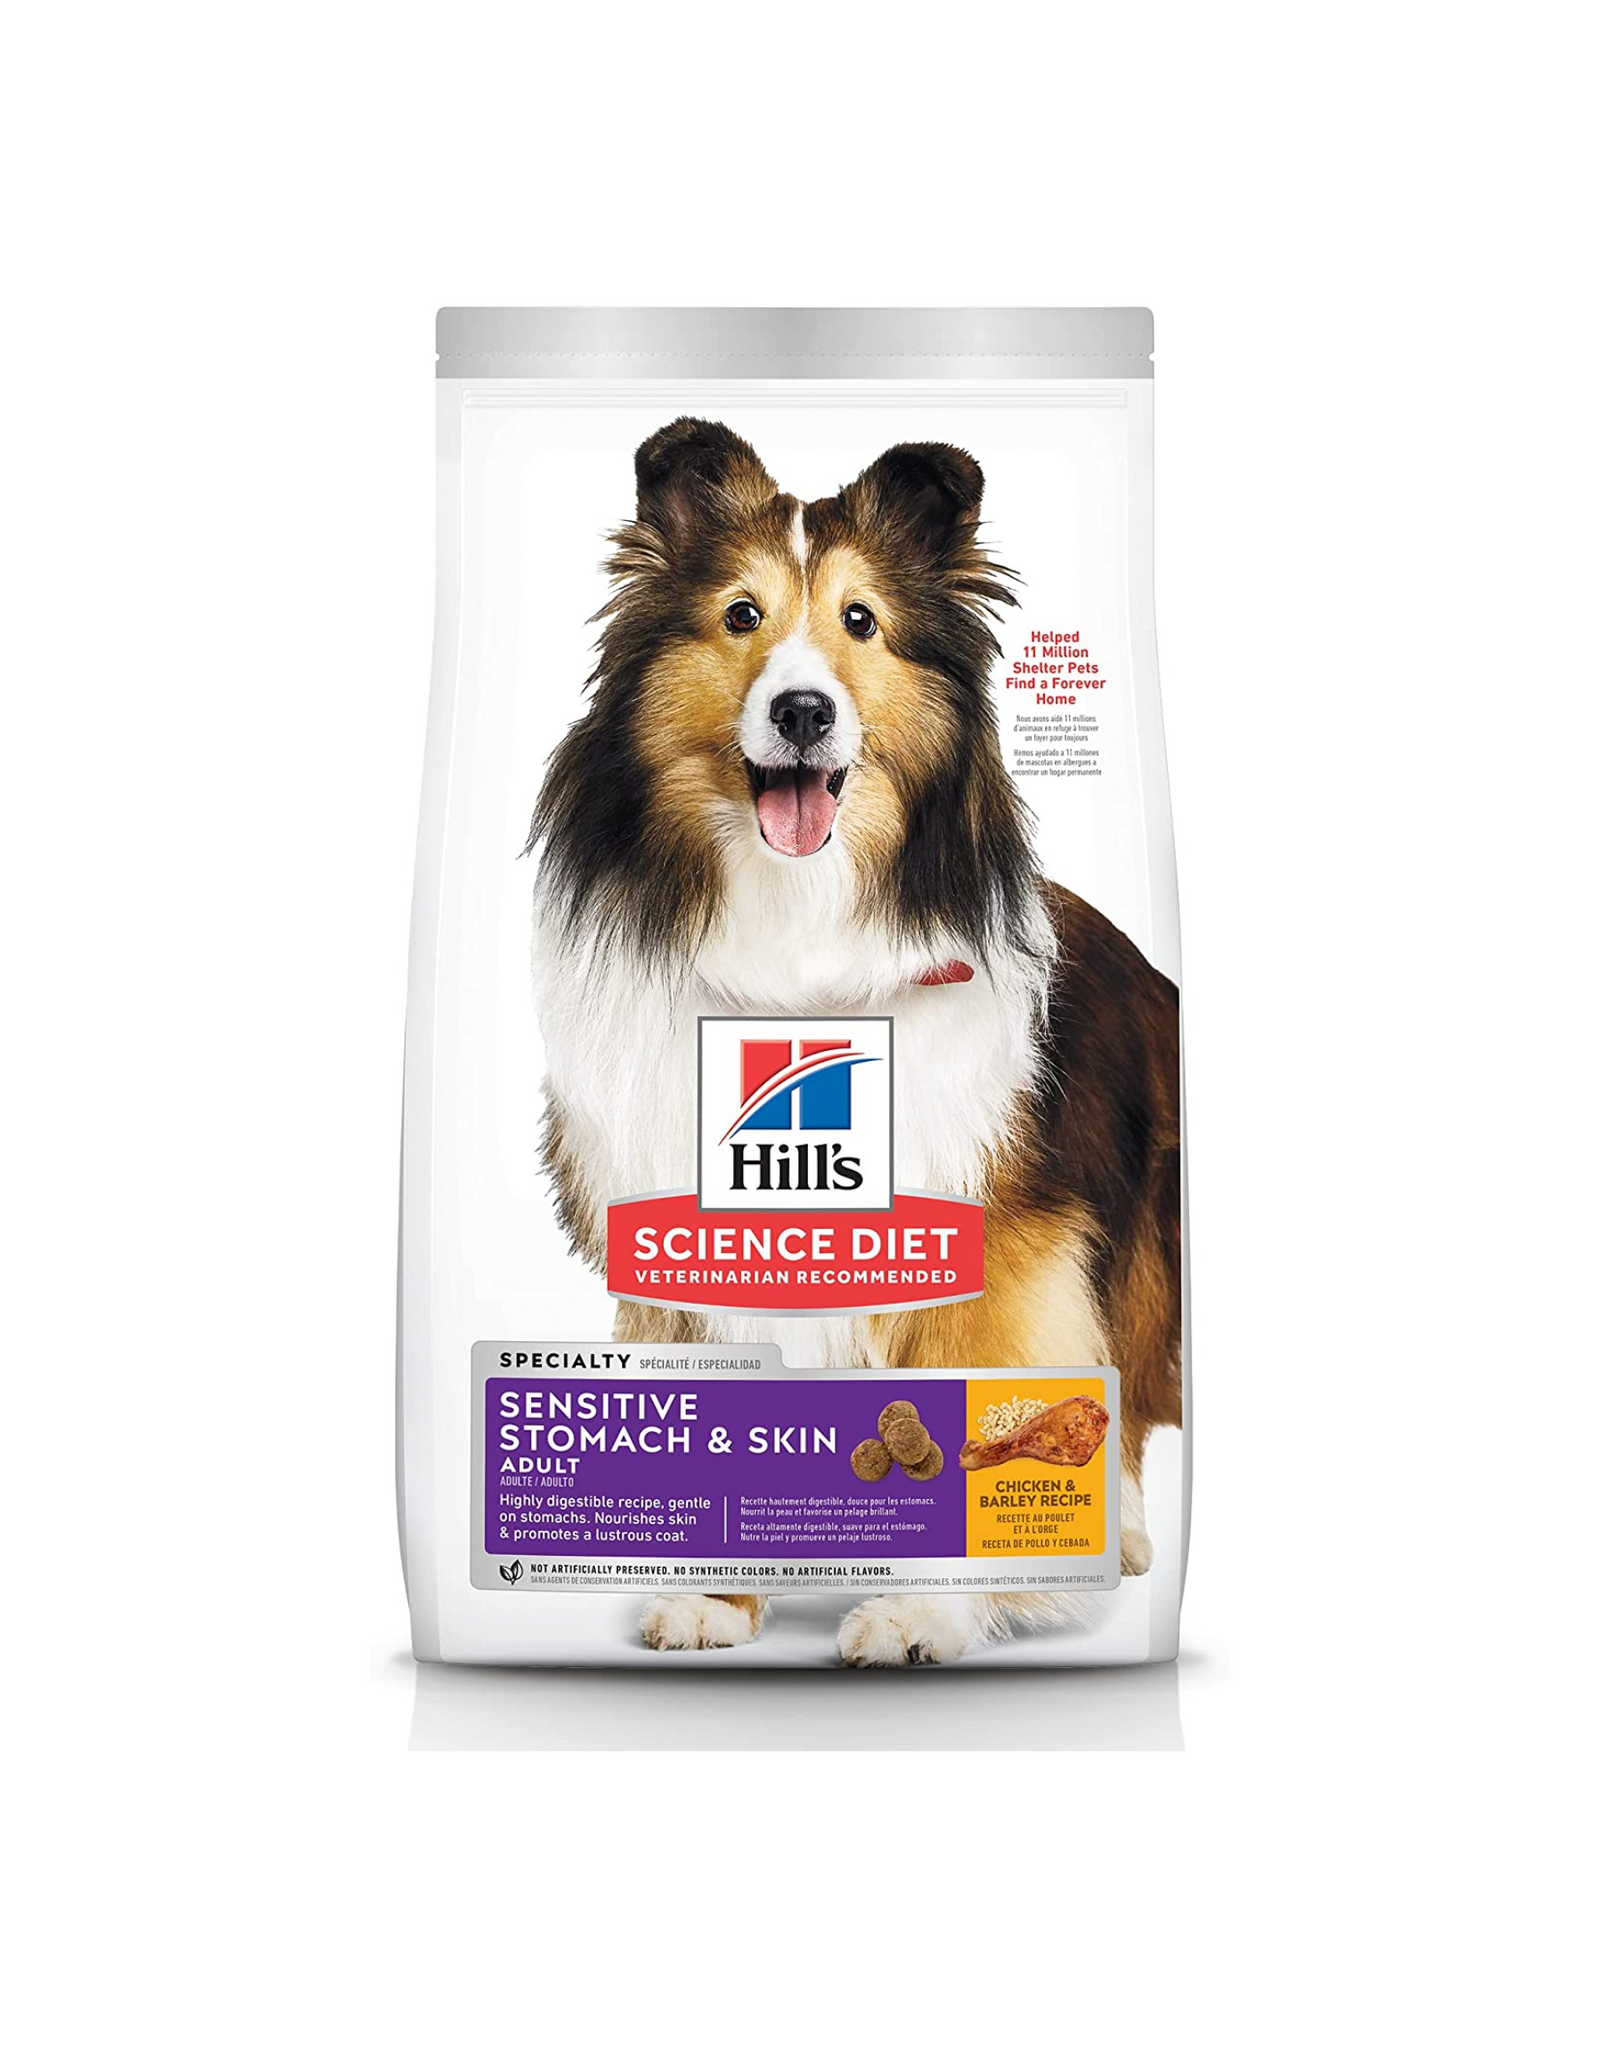 Hill's Science Diet Dog Food, Sensitive Stomach & Skin, Chicken & Barley Recipe, 4 lb. - for Adult